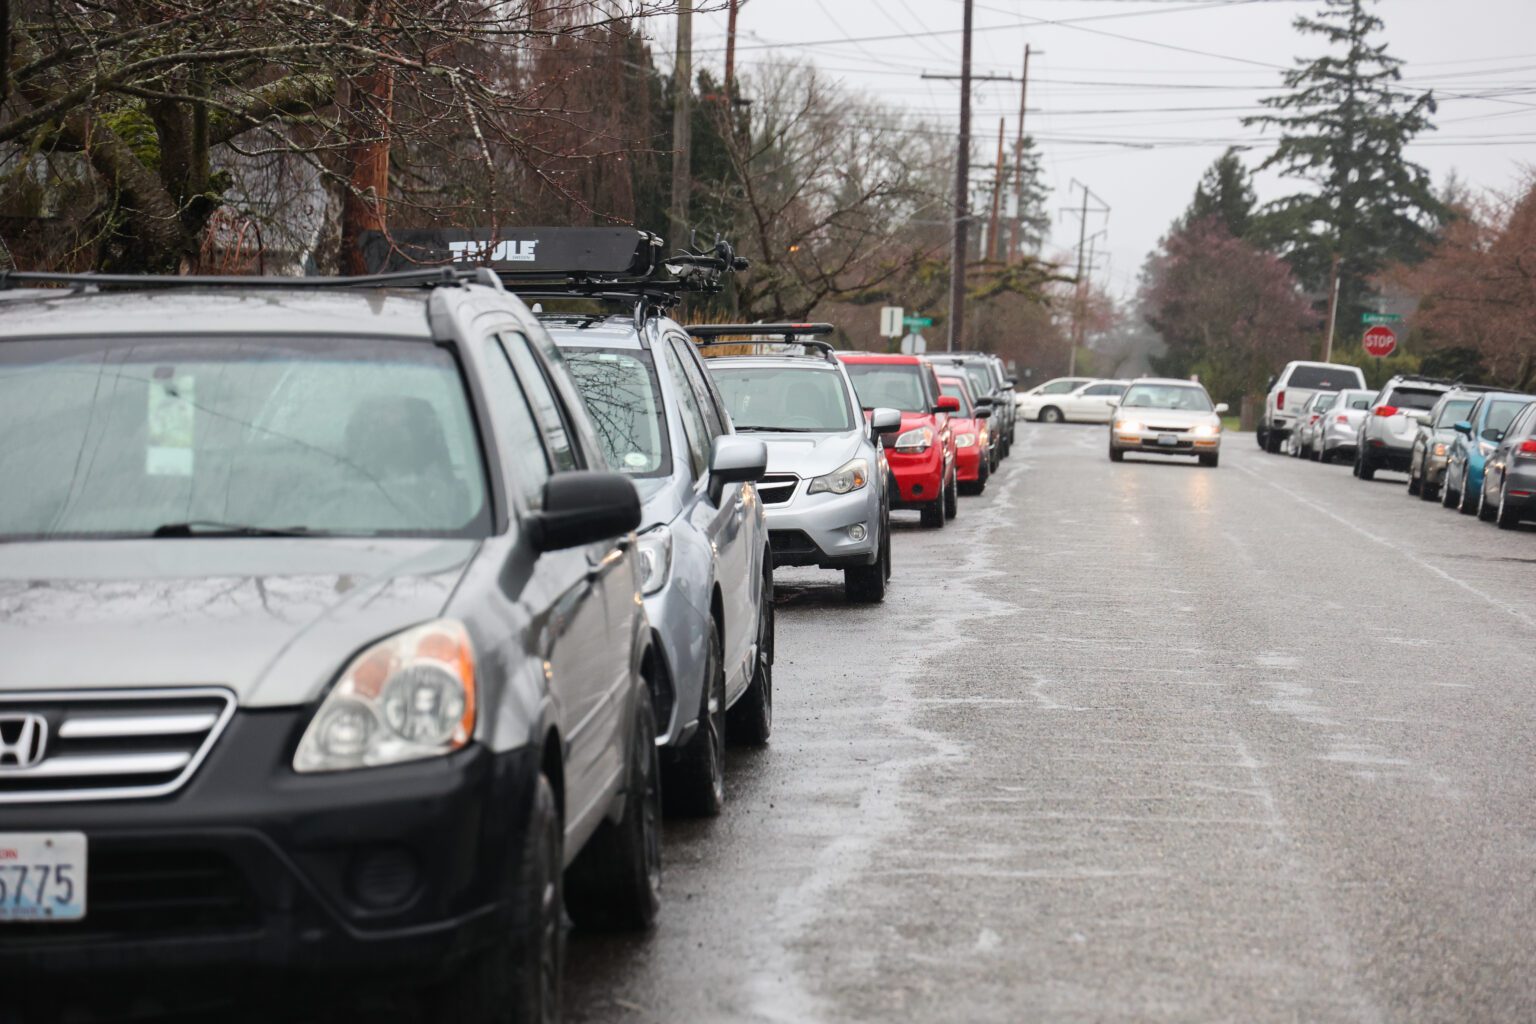 Parked cars line Humboldt Street March 17 in Bellingham's York neighborhood. Vehicle thefts have increased sharply in York and the rest of Bellingham since early 2021.